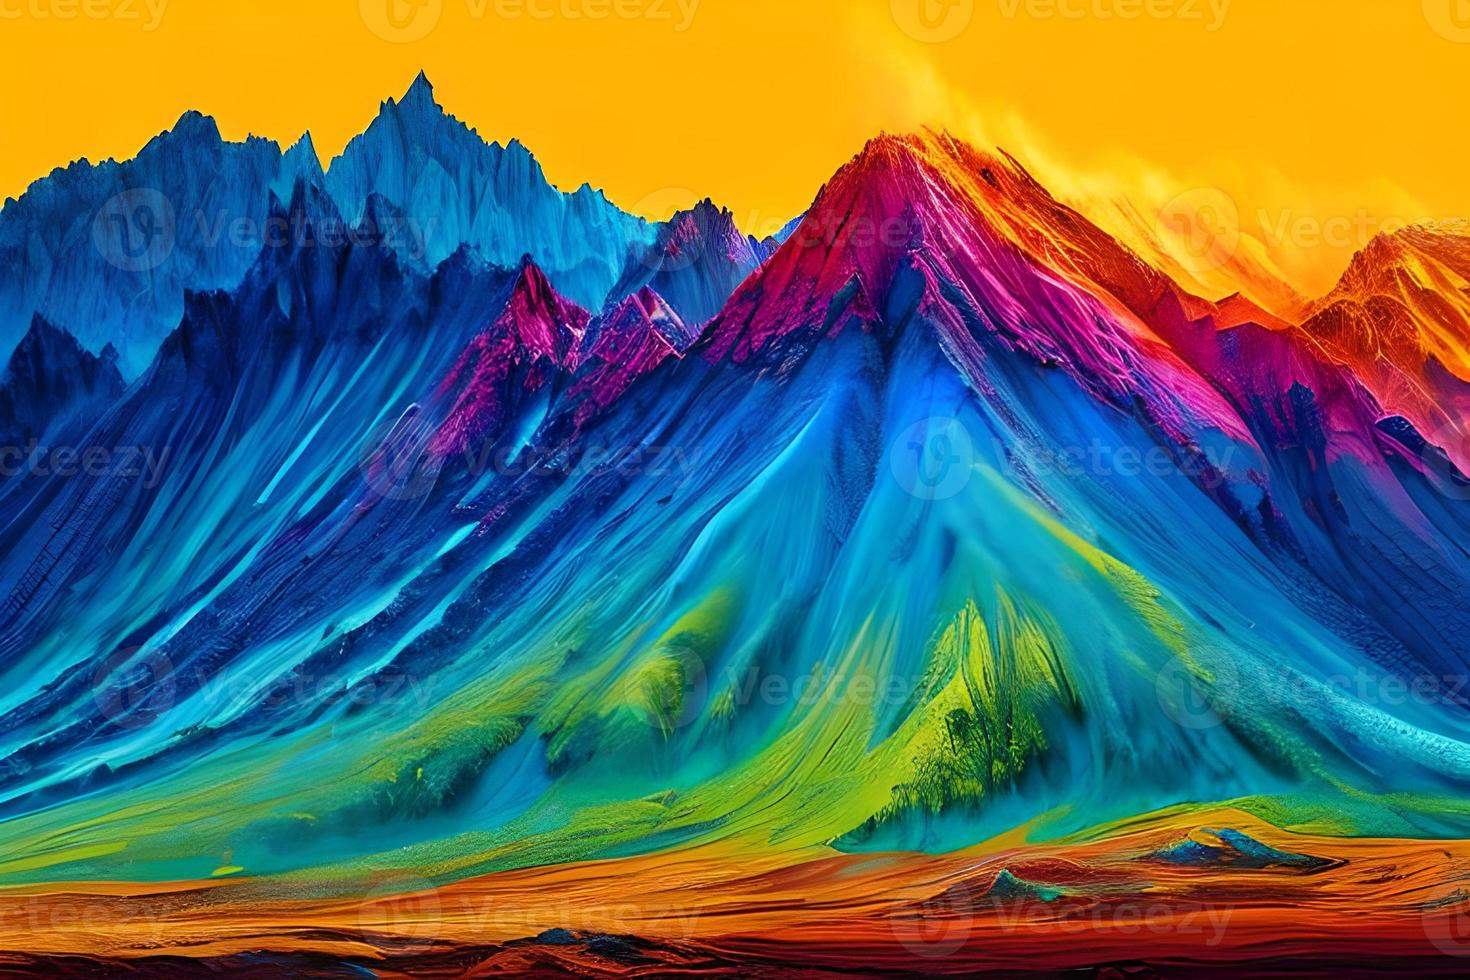 Water color or oil painting fine art illustration of abstract colorful panoramic mountain and nature print digital art. photo